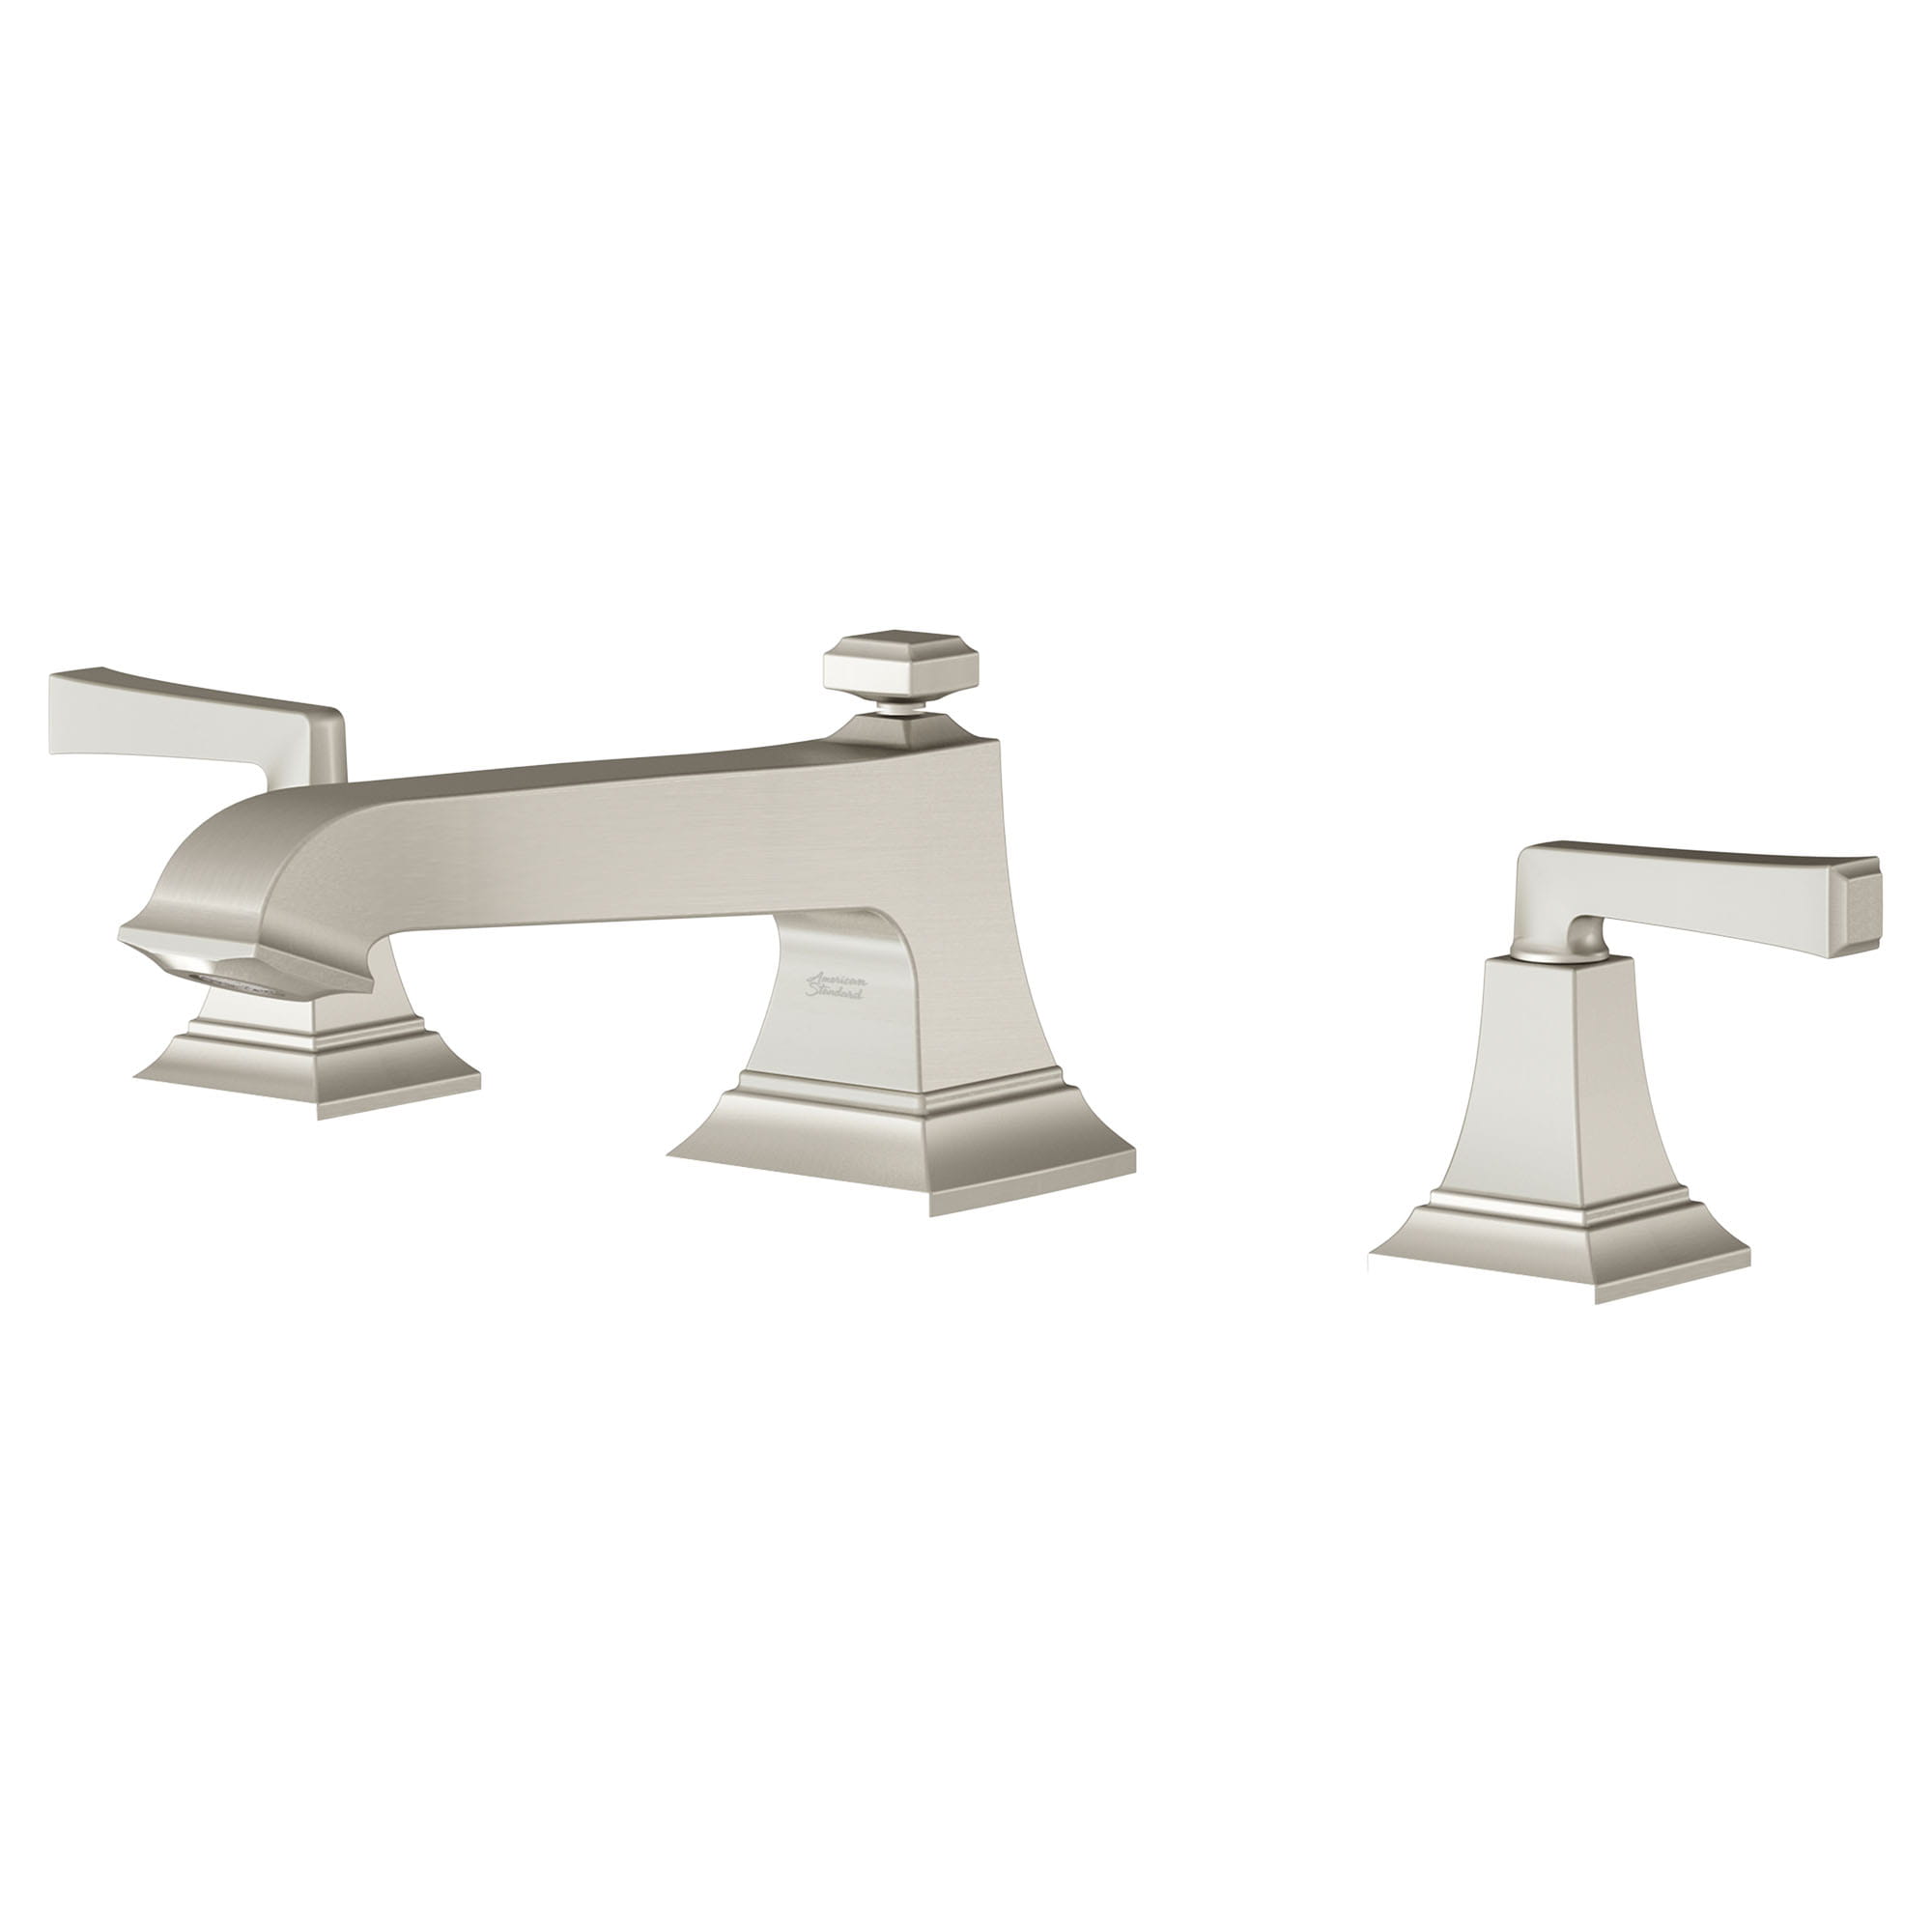 Town Square S Bathub Faucet With Lever Handles for Flash Rough In Valve   BRUSHED NICKEL